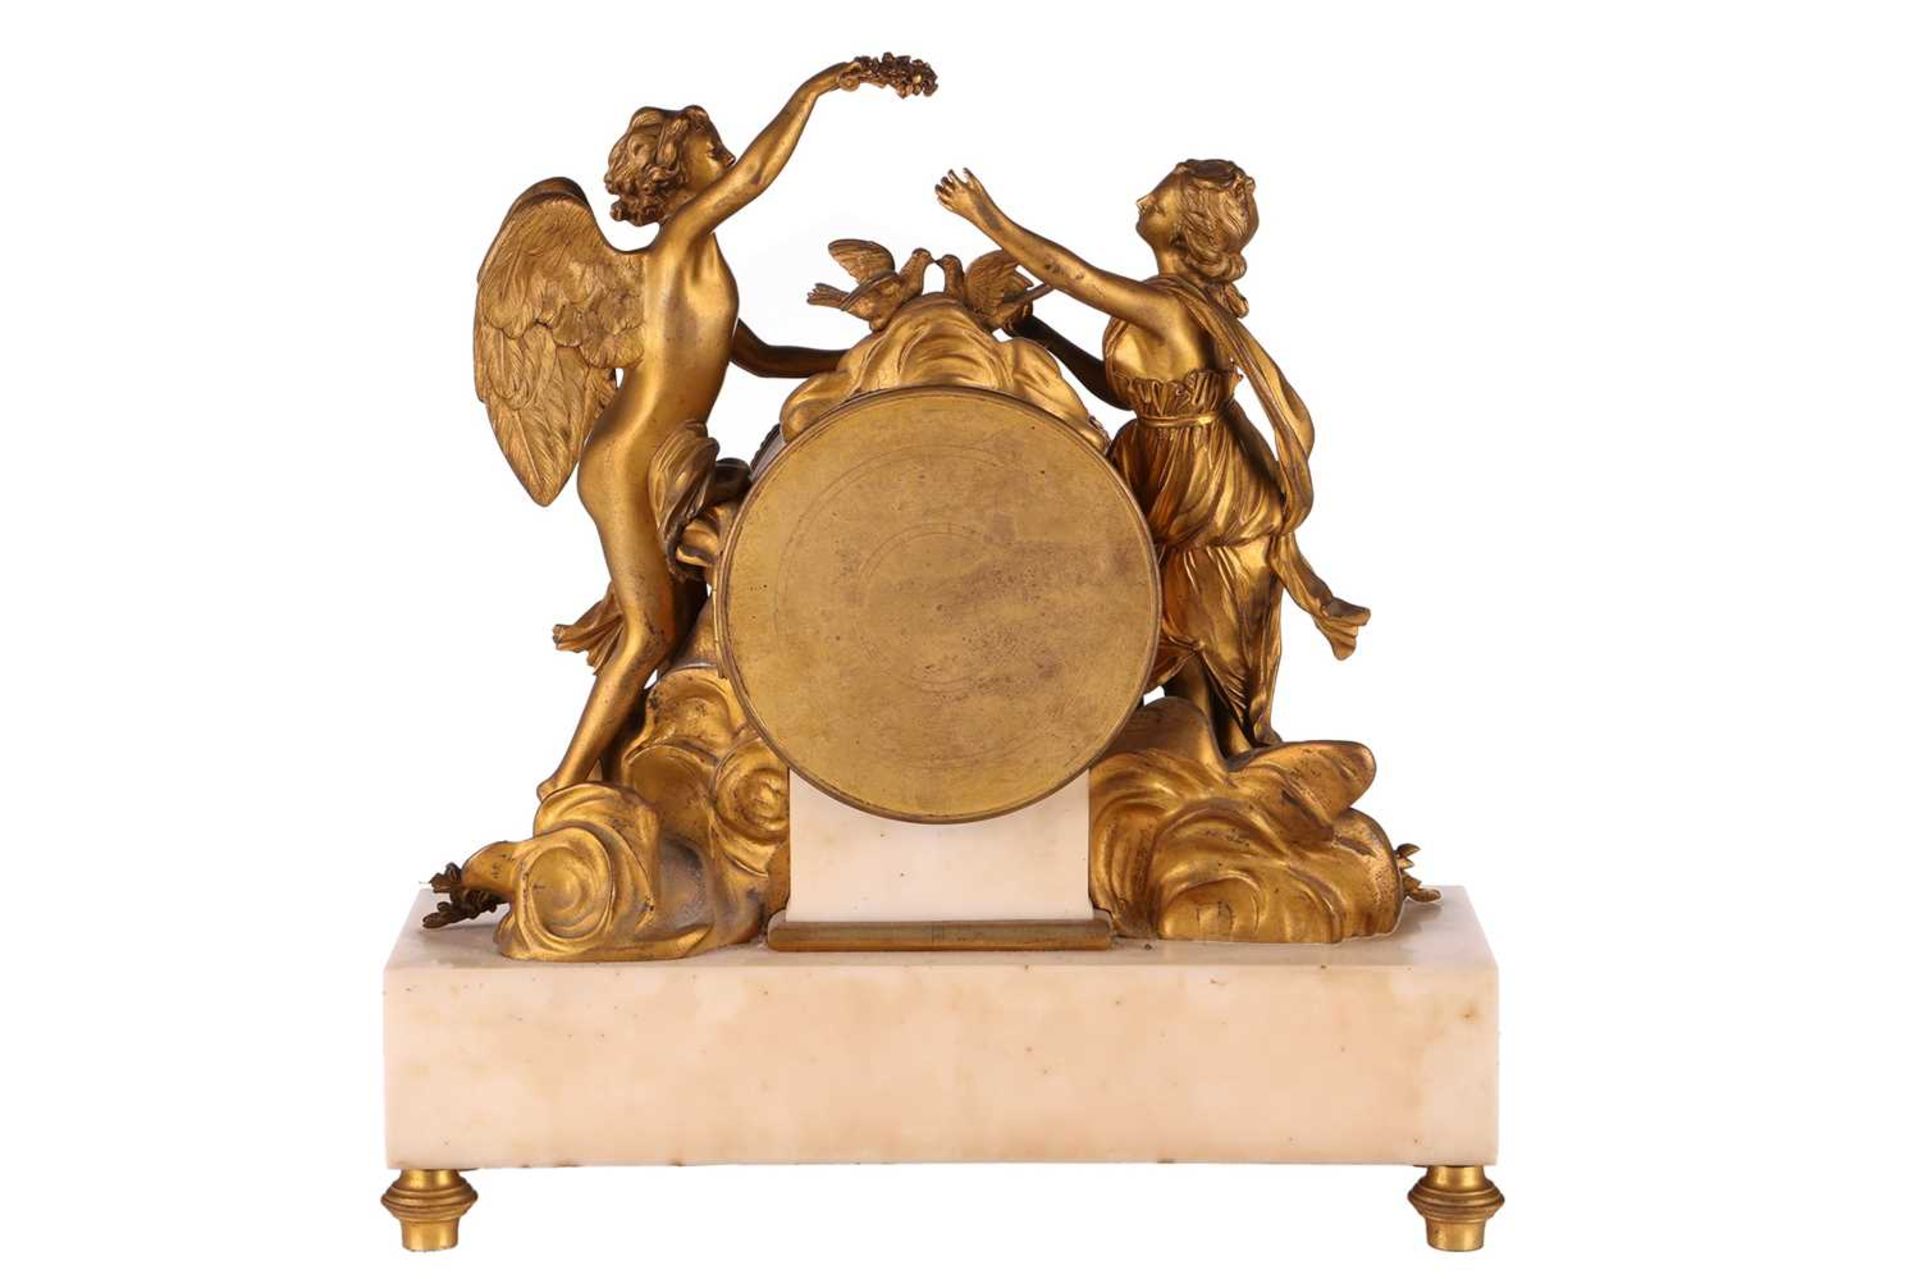 A French Le Roy et Fils (?) ormolu and white marble mantel clock with a figural mount allegorical of - Image 3 of 6